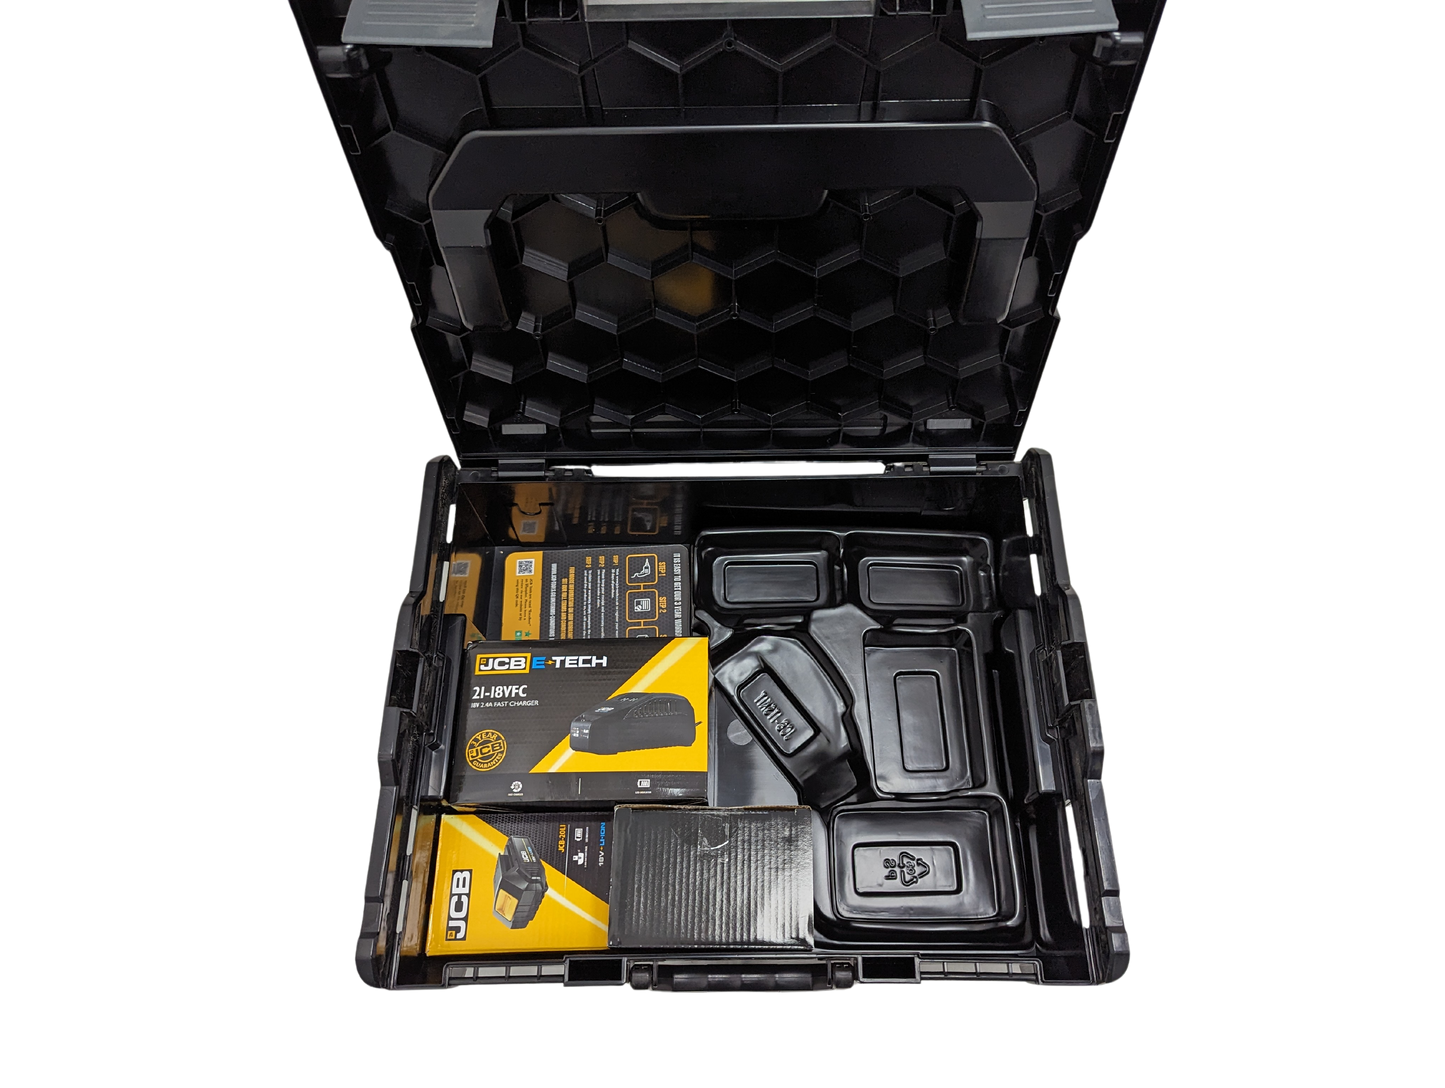 18V Combi Drill & Battery & Charger Kit (FREE 40pc Accessory Set & Light Body)